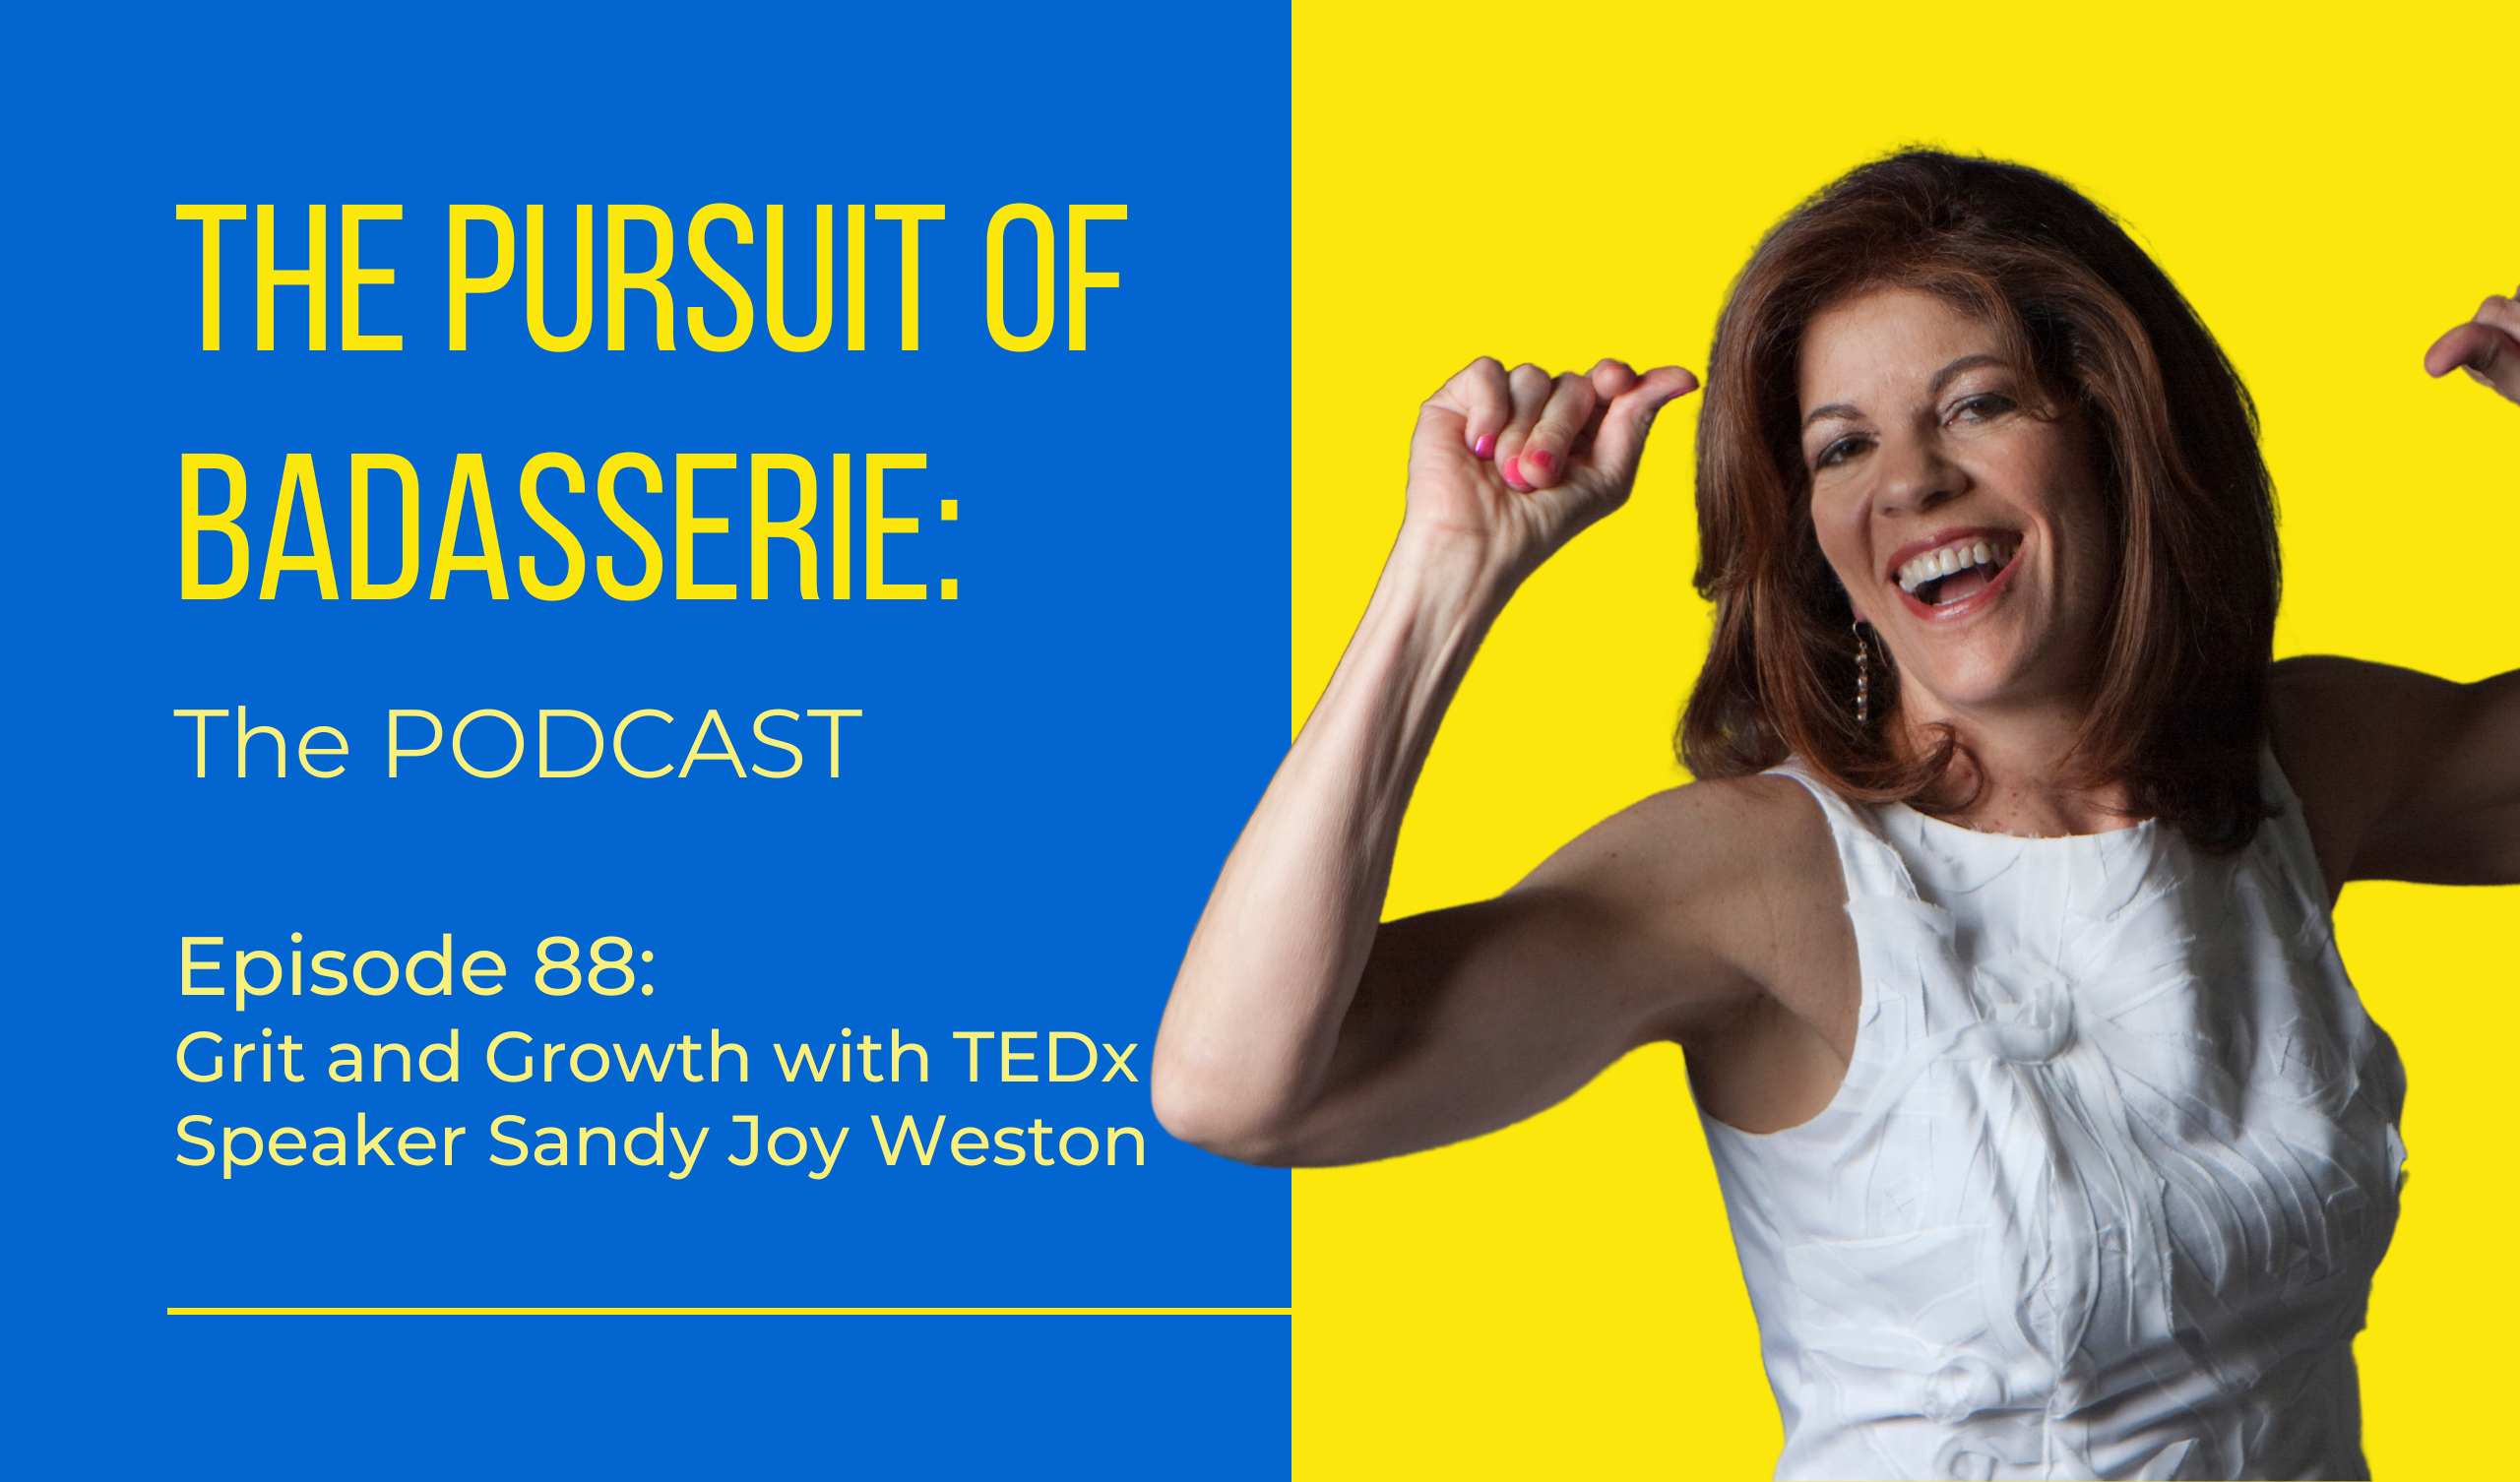 Grit and Growth with TEDx Speaker Sandy Joy Weston